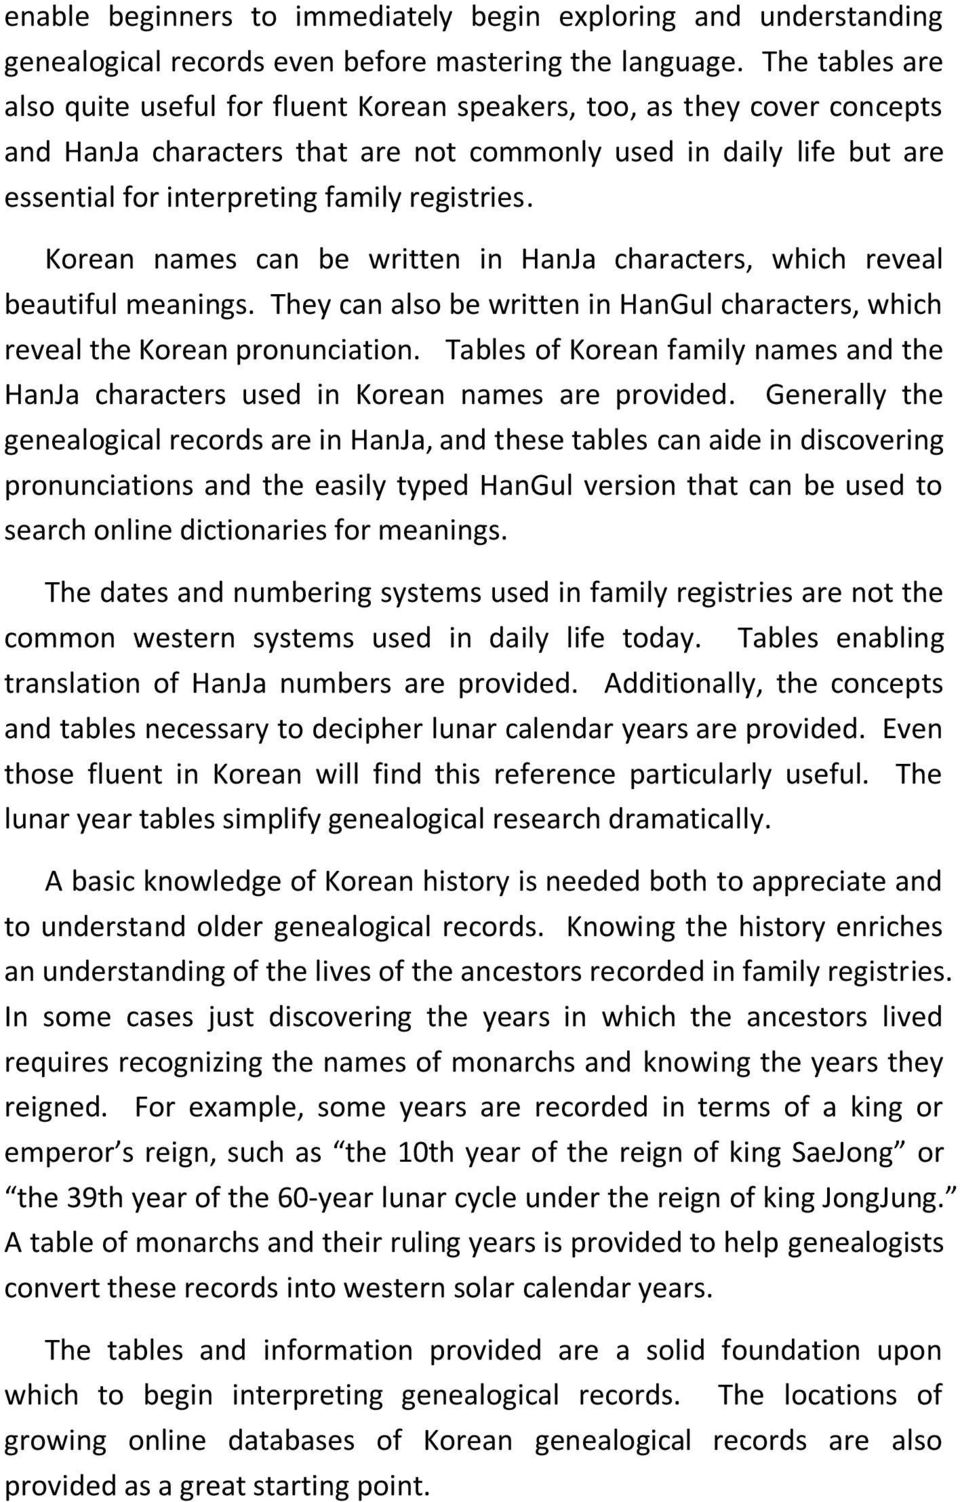 registries. Korean names can be written in HanJa characters, which reveal beautiful meanings. They can also be written in HanGul characters, which reveal the Korean pronunciation.